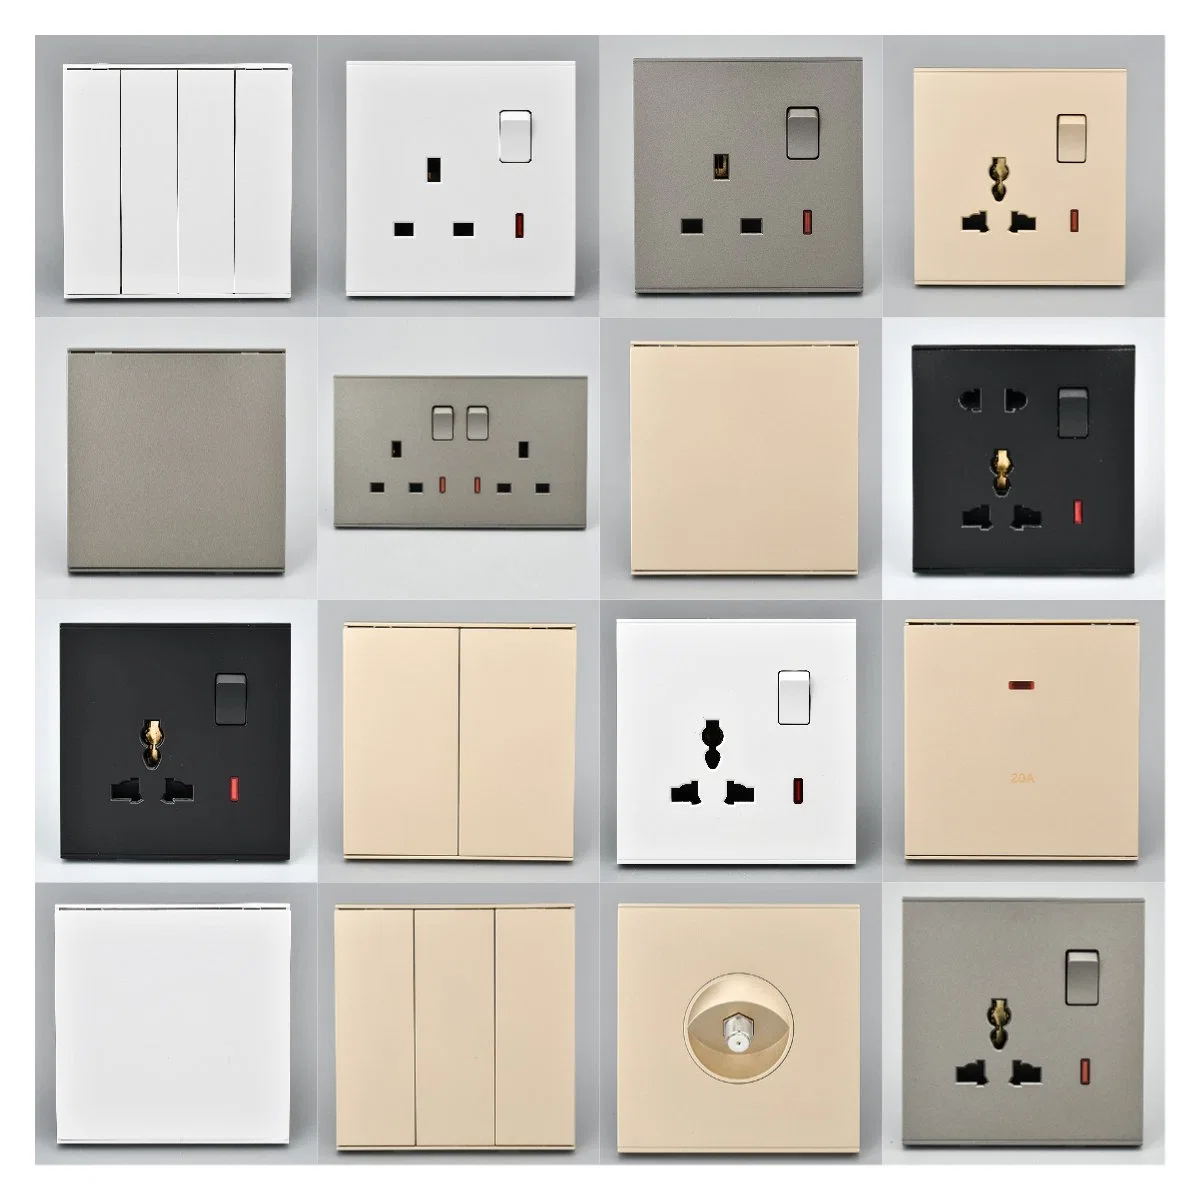 High New Design Home Hotel Modern Design Well Known UK Standard Africa Grey Color 1gang 3way Electric Wall Light Switch Socket